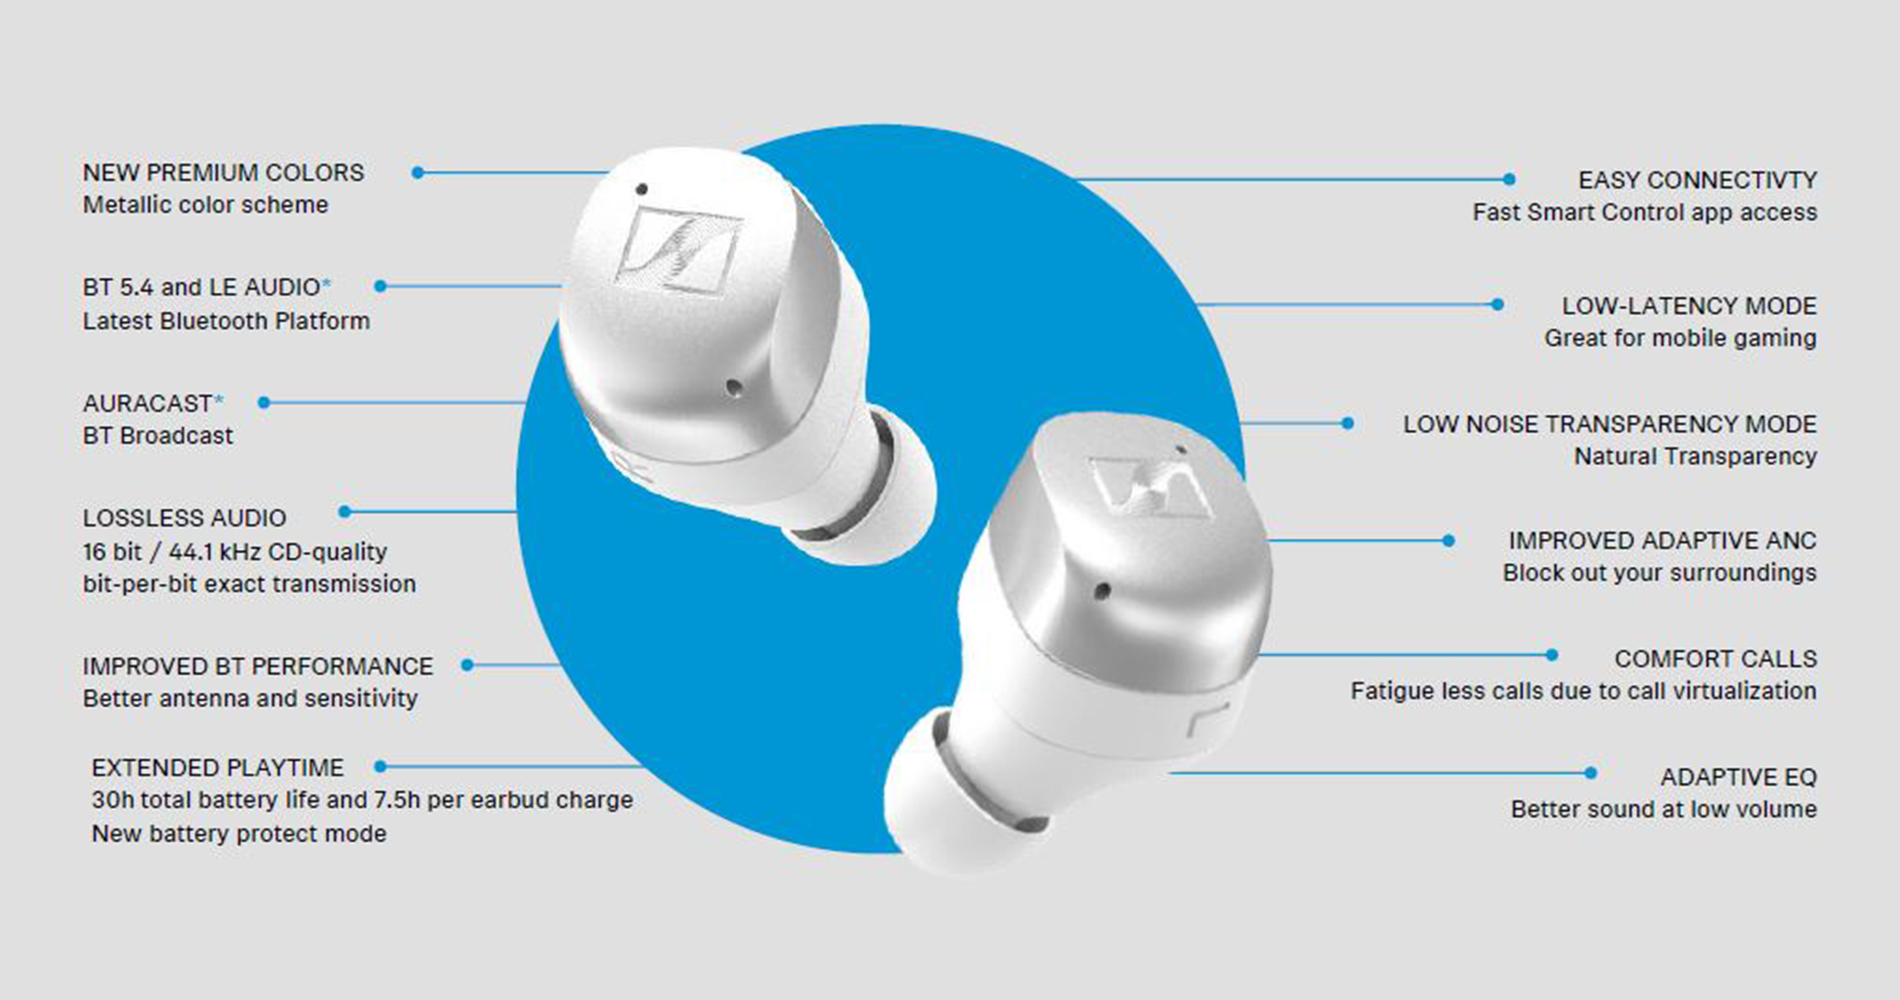 Sennheiser MOMENTUM True Wireless 4 with Adaptive Noise Cancellation Overview Diagram